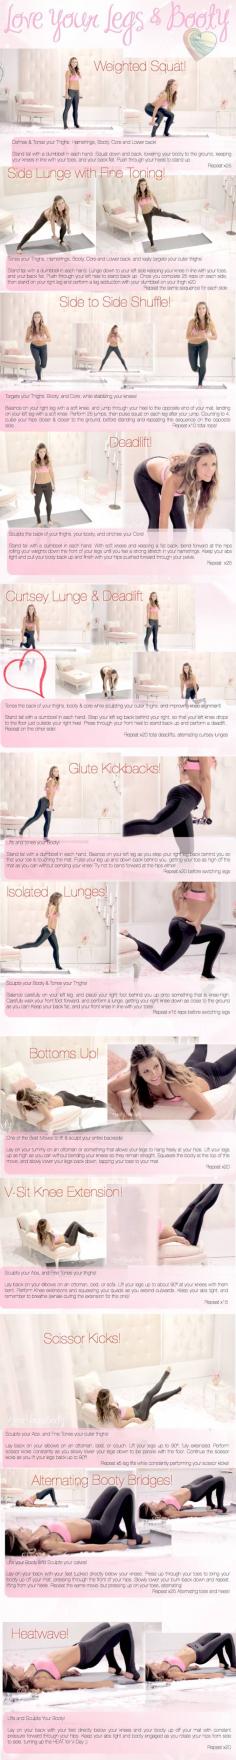 Love Your Body Legs and Booty Routine with Katrina from Tone It Up! #body #workout